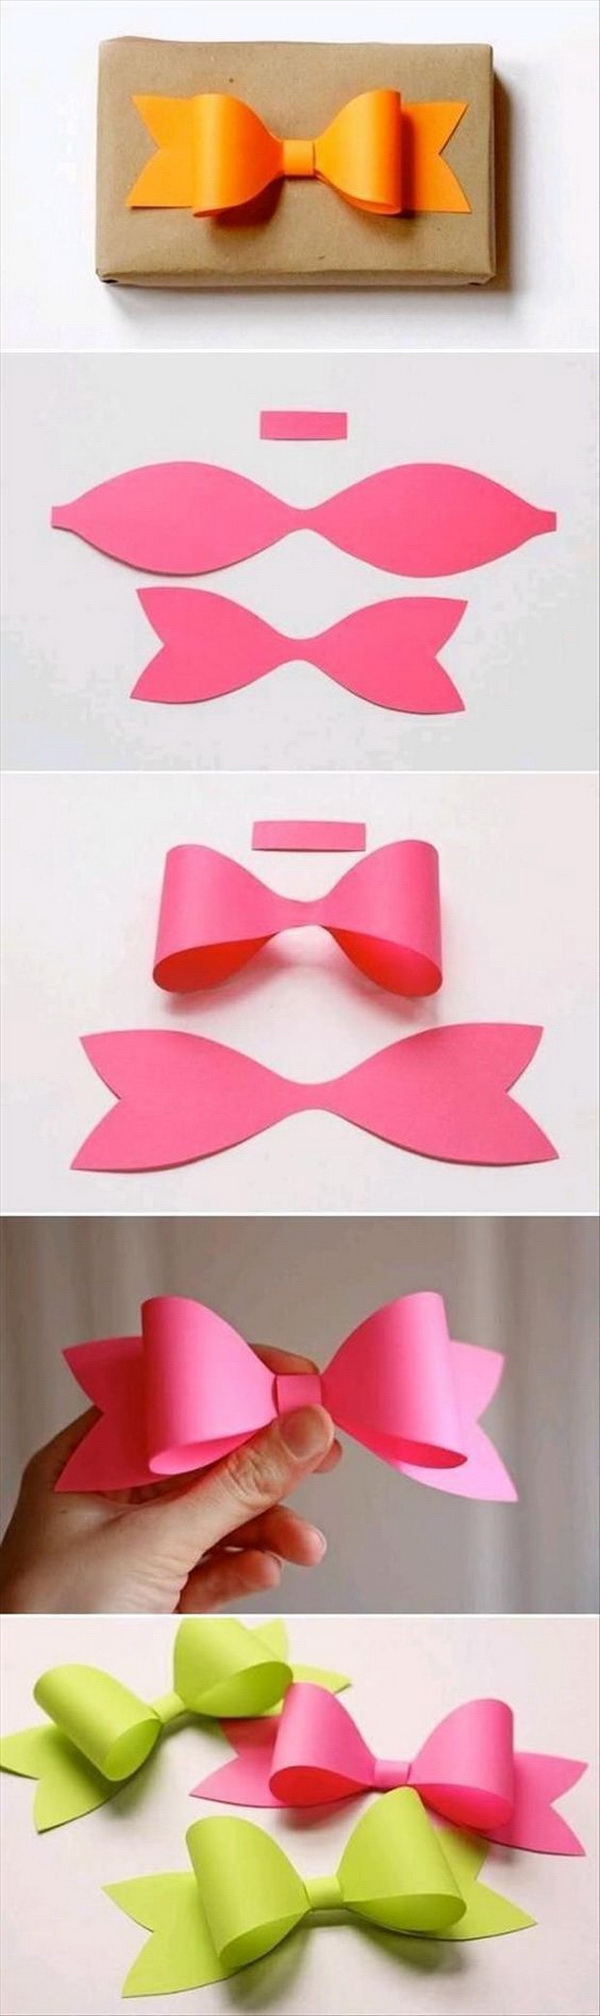 Easy Kids Craft Ideas: Gift Wrapping Bows. 